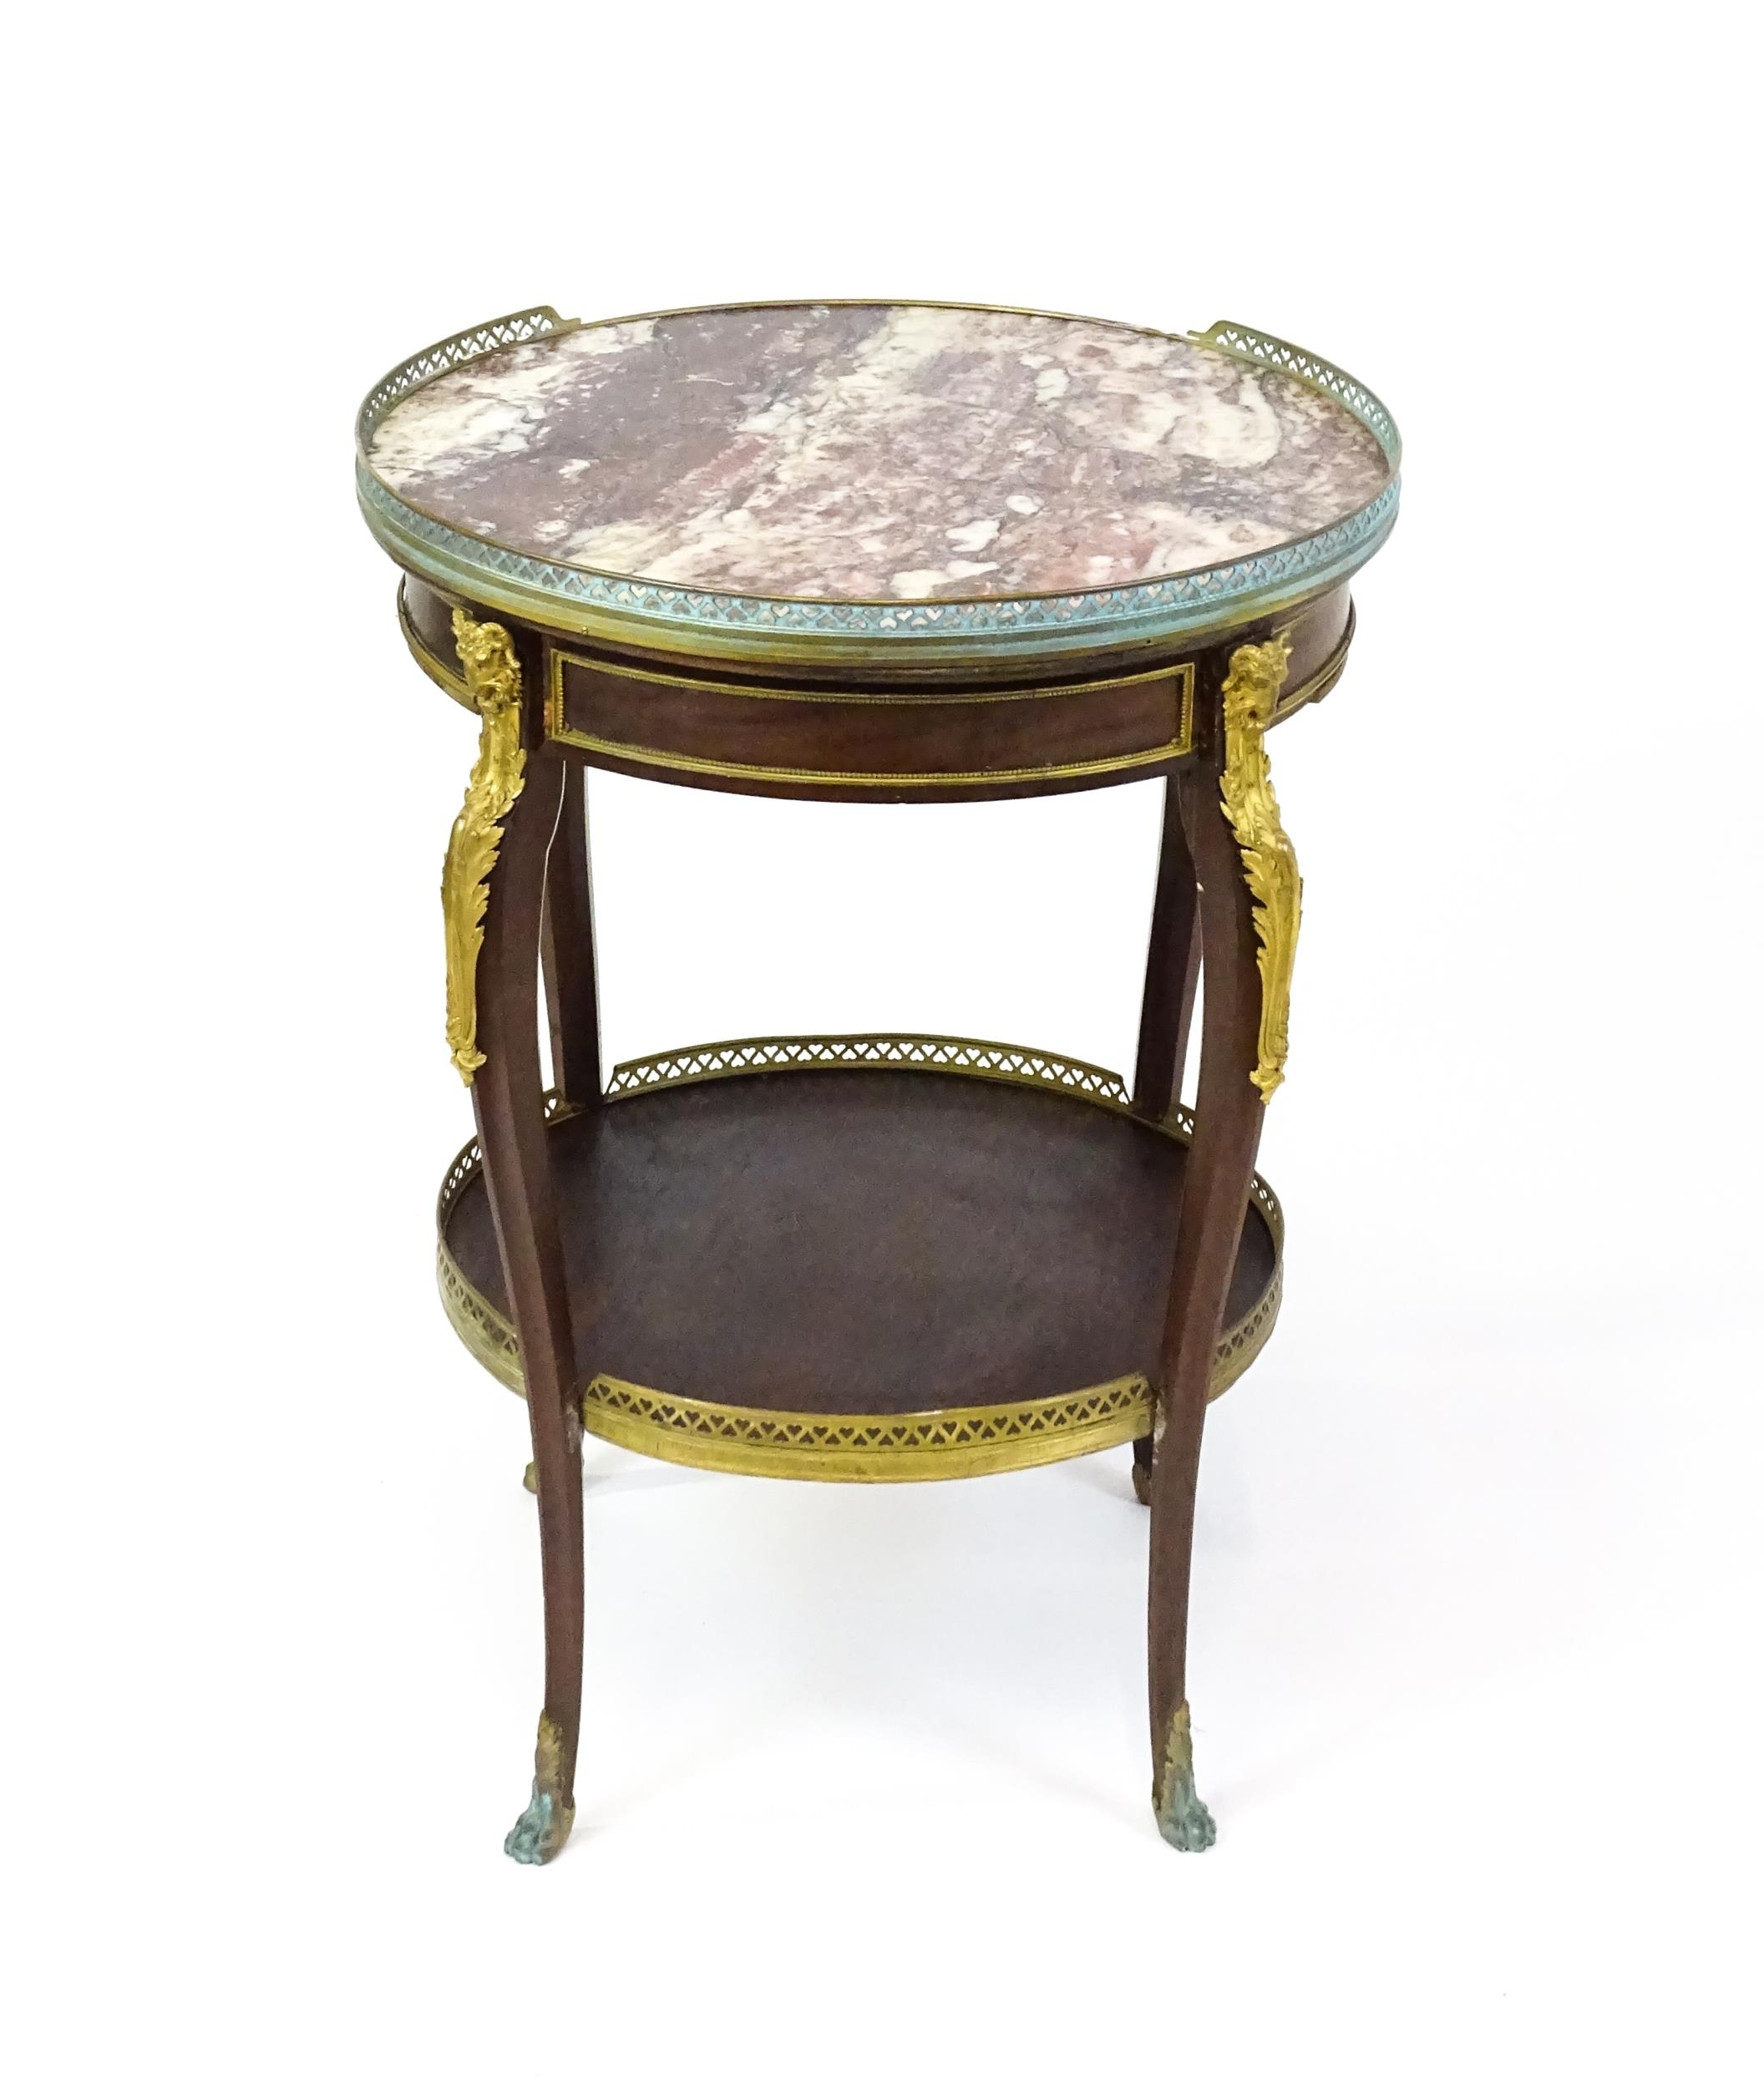 A 19thC rosewood and marble topped side table surmounted by a pierced surround and having a single - Image 2 of 10